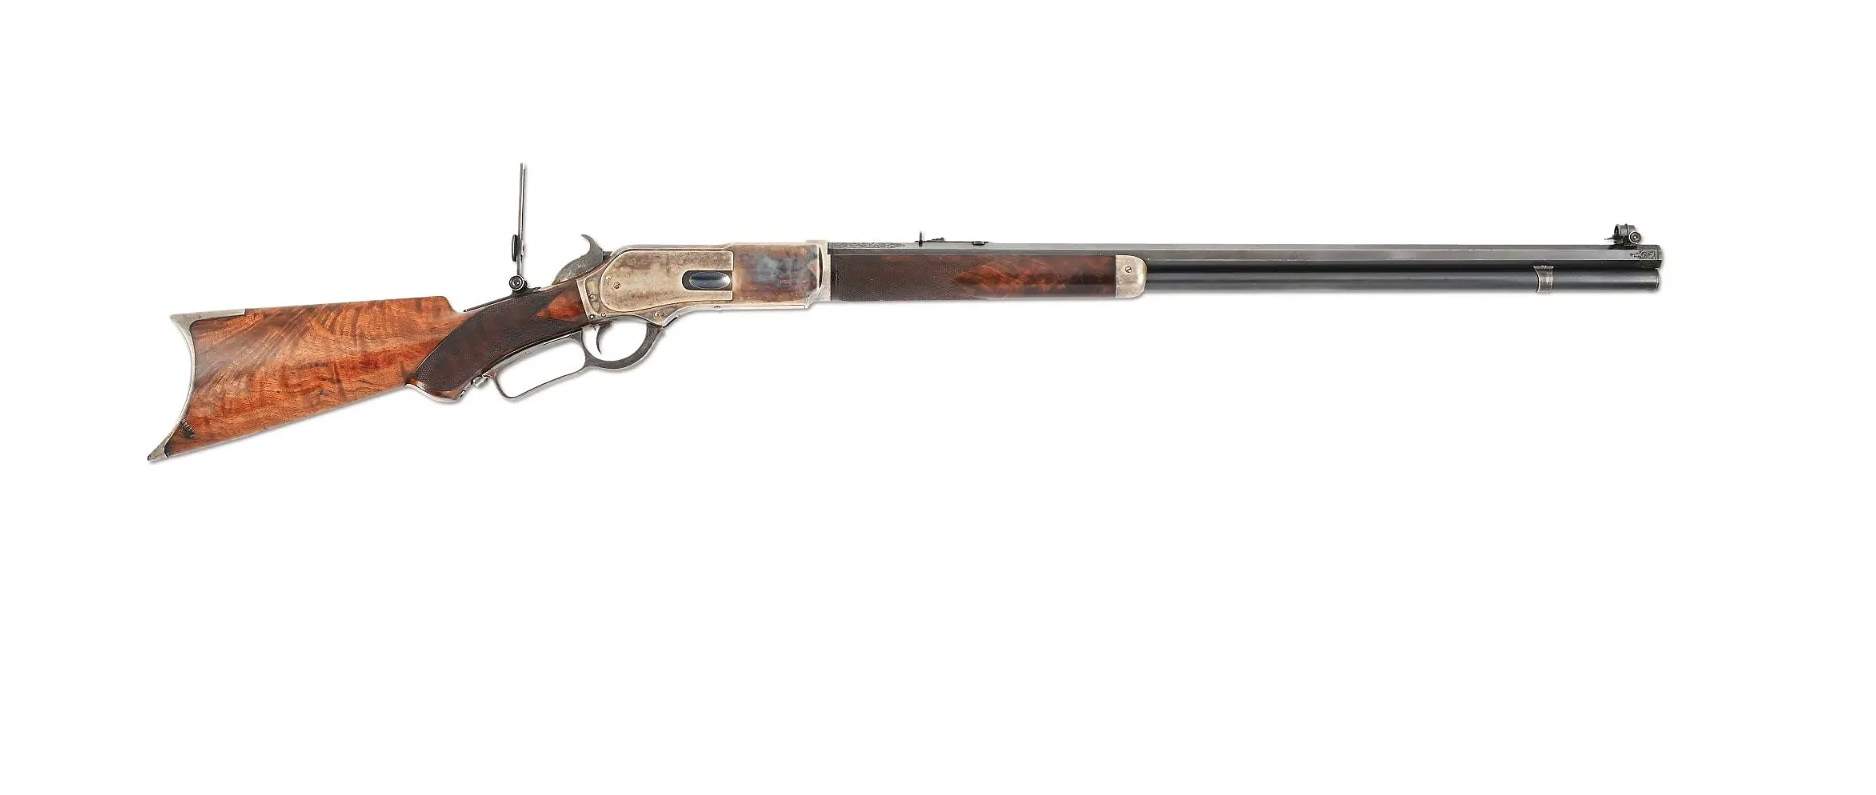 Winchester 1876 Deluxe, designated “1 of 1000," $280,000 ($358,400 with buyer’s premium) at Morphy Auctions.